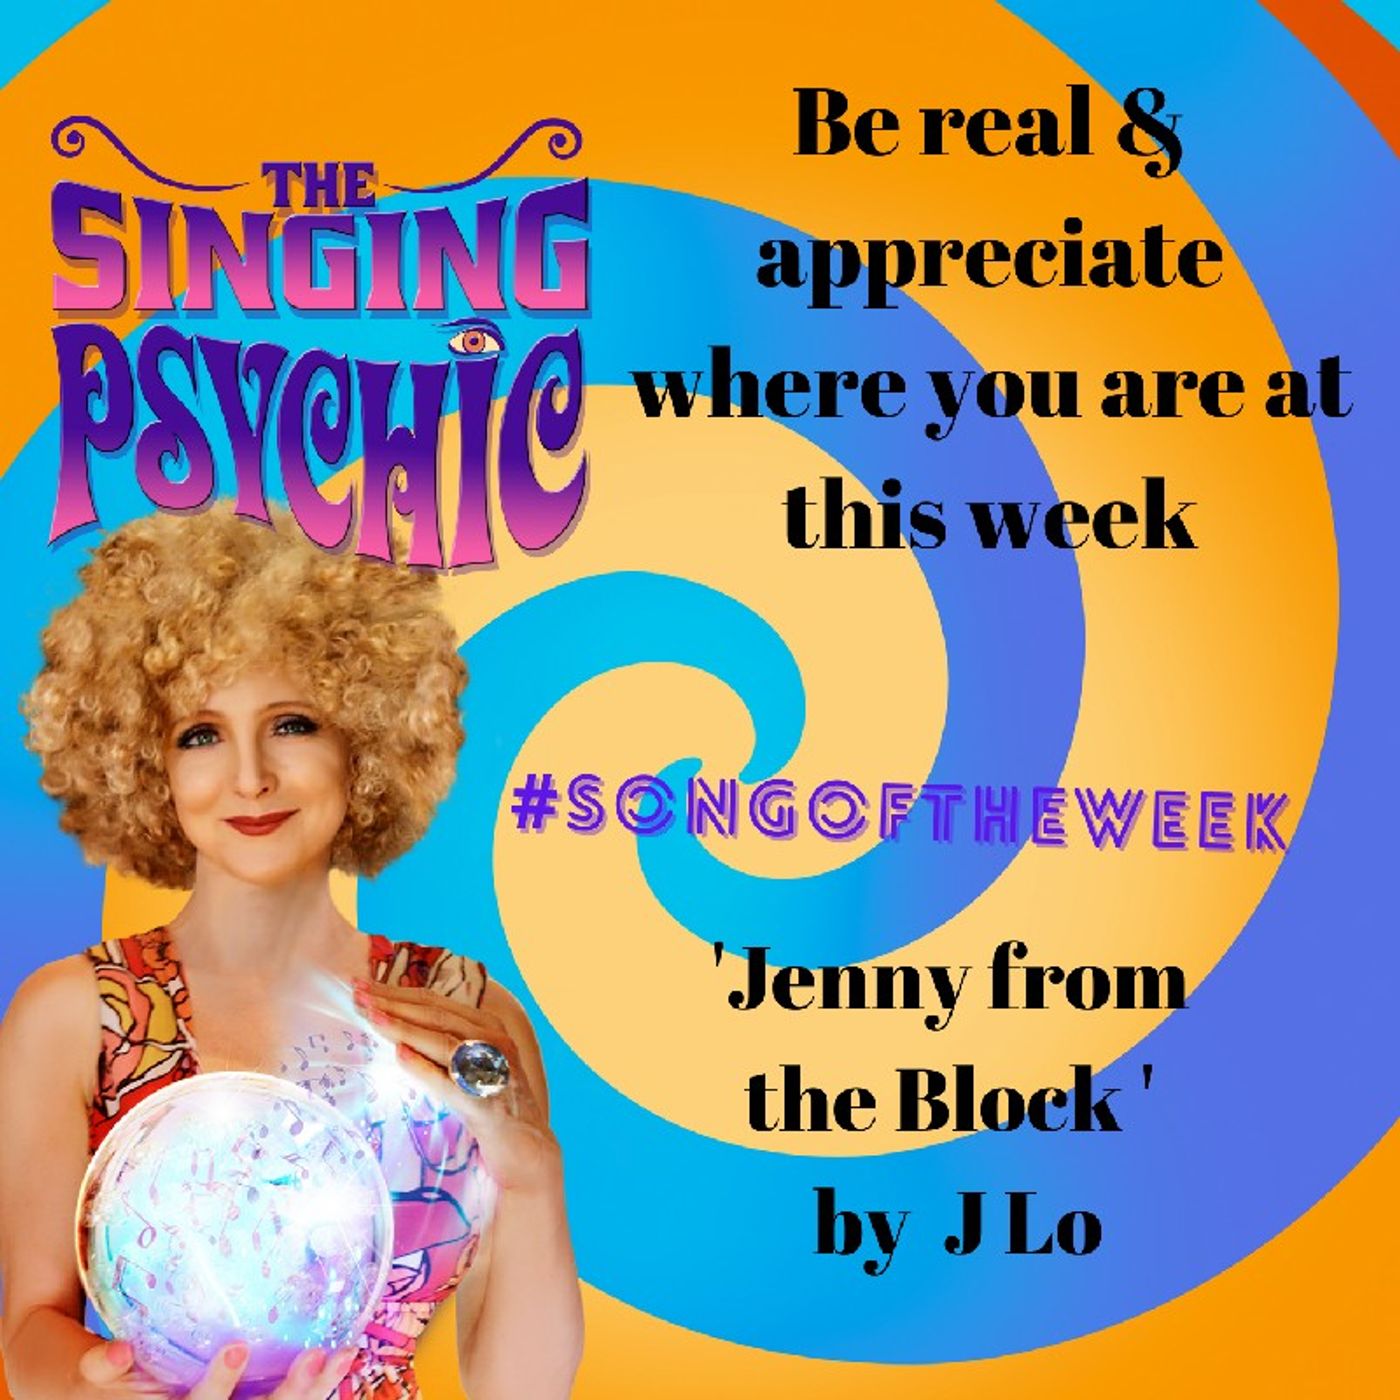 'Jenny from the Block' By J Lo #SongOfTheWeek By The Singing Psychic